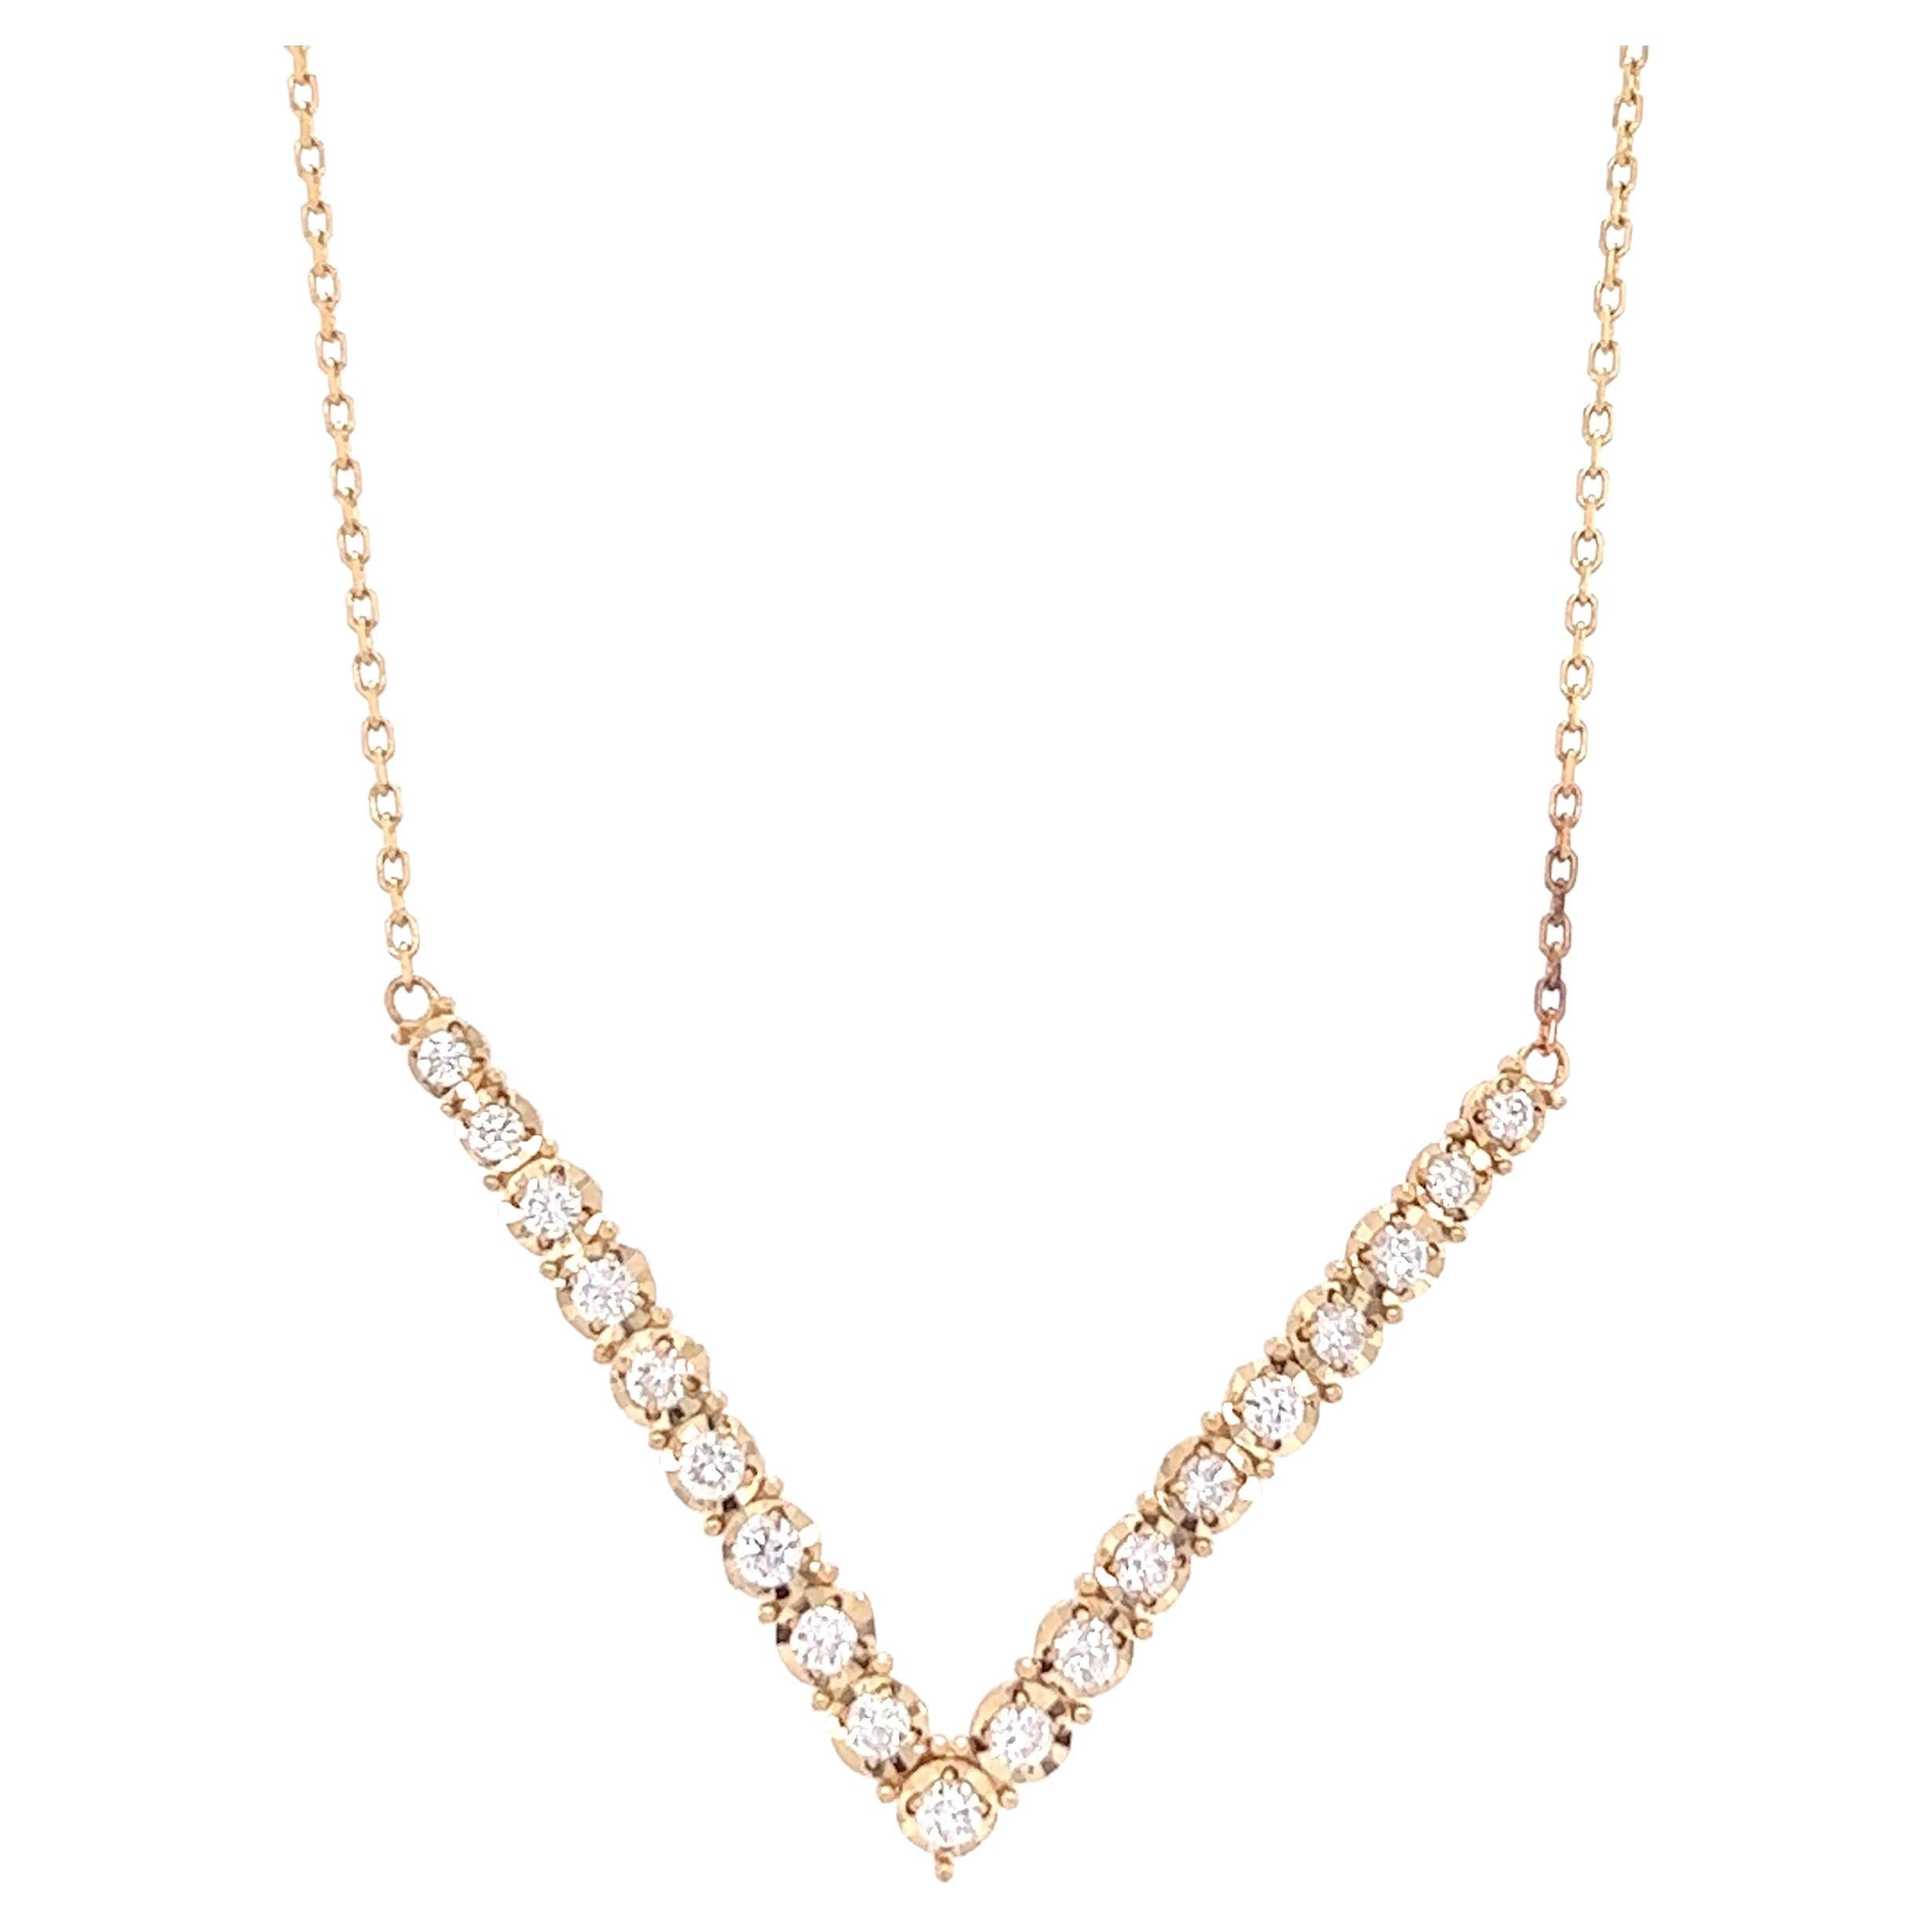 0.88 Carat Diamond Chain Yellow Gold Necklace For Sale